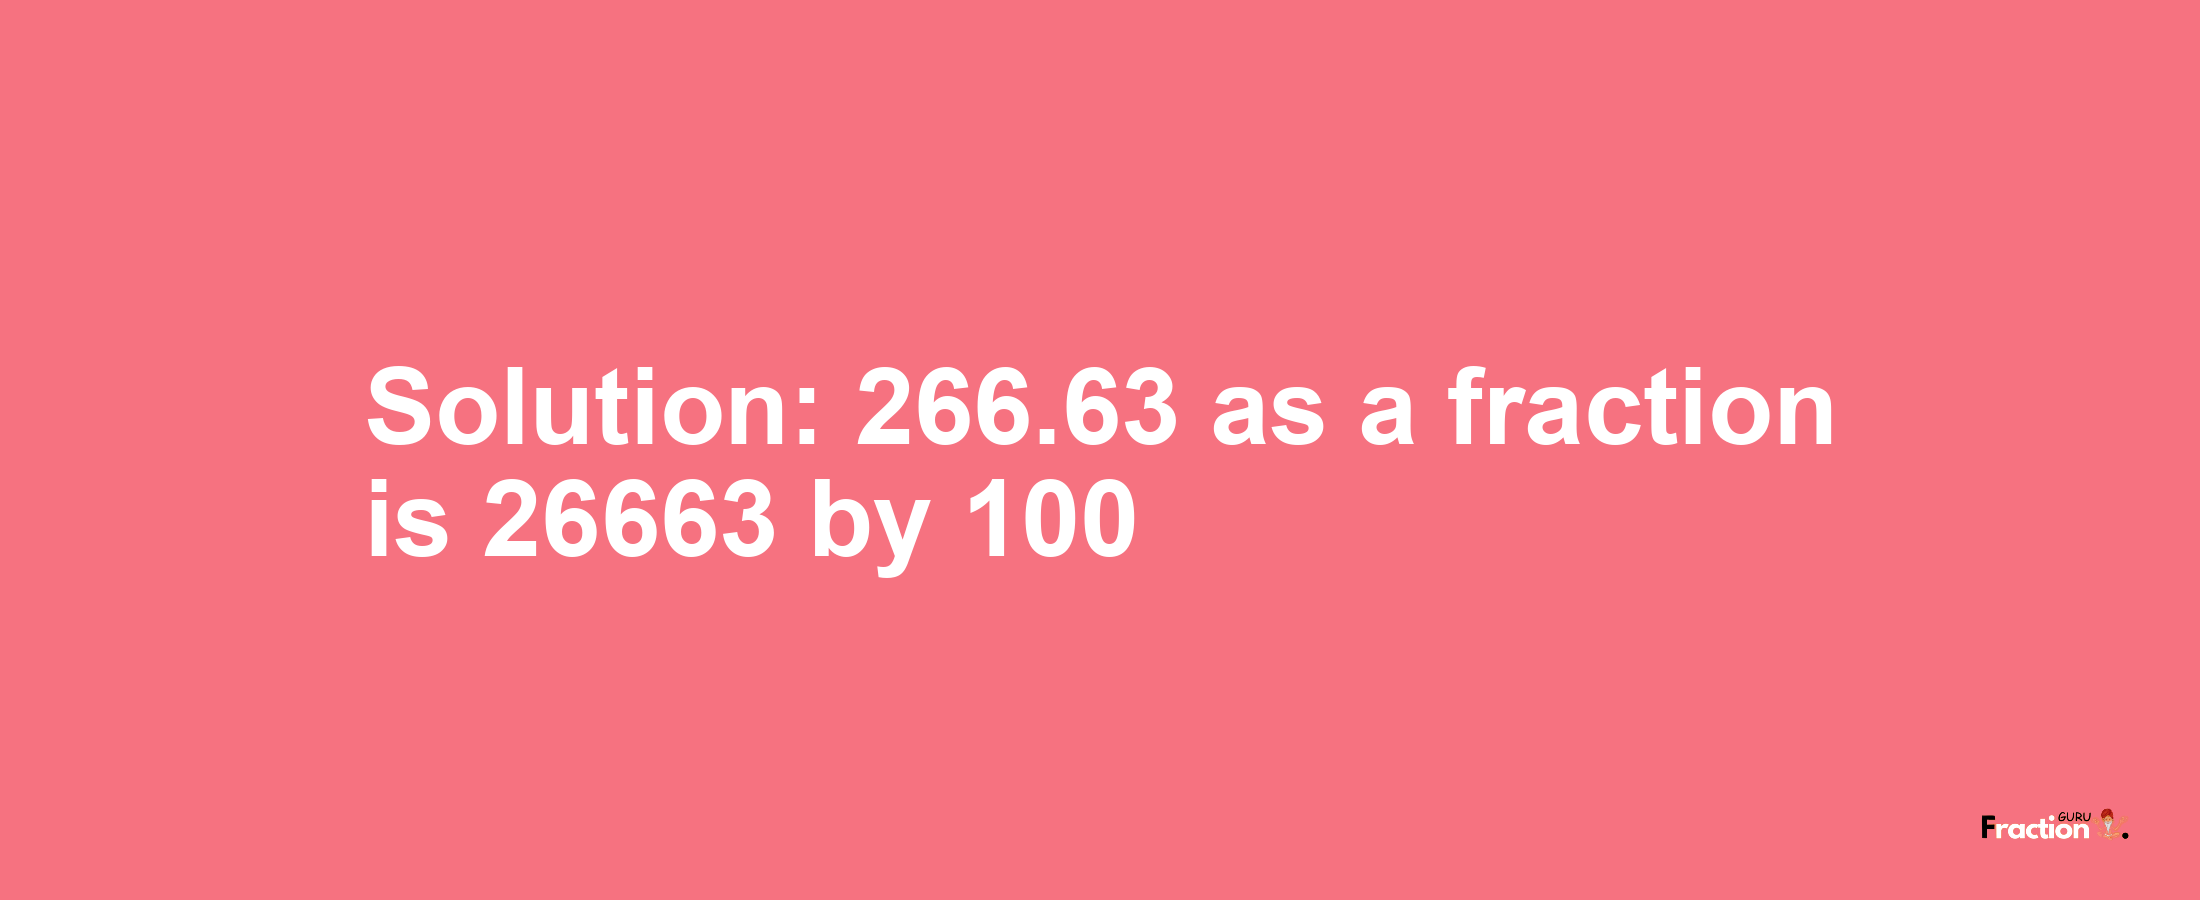 Solution:266.63 as a fraction is 26663/100